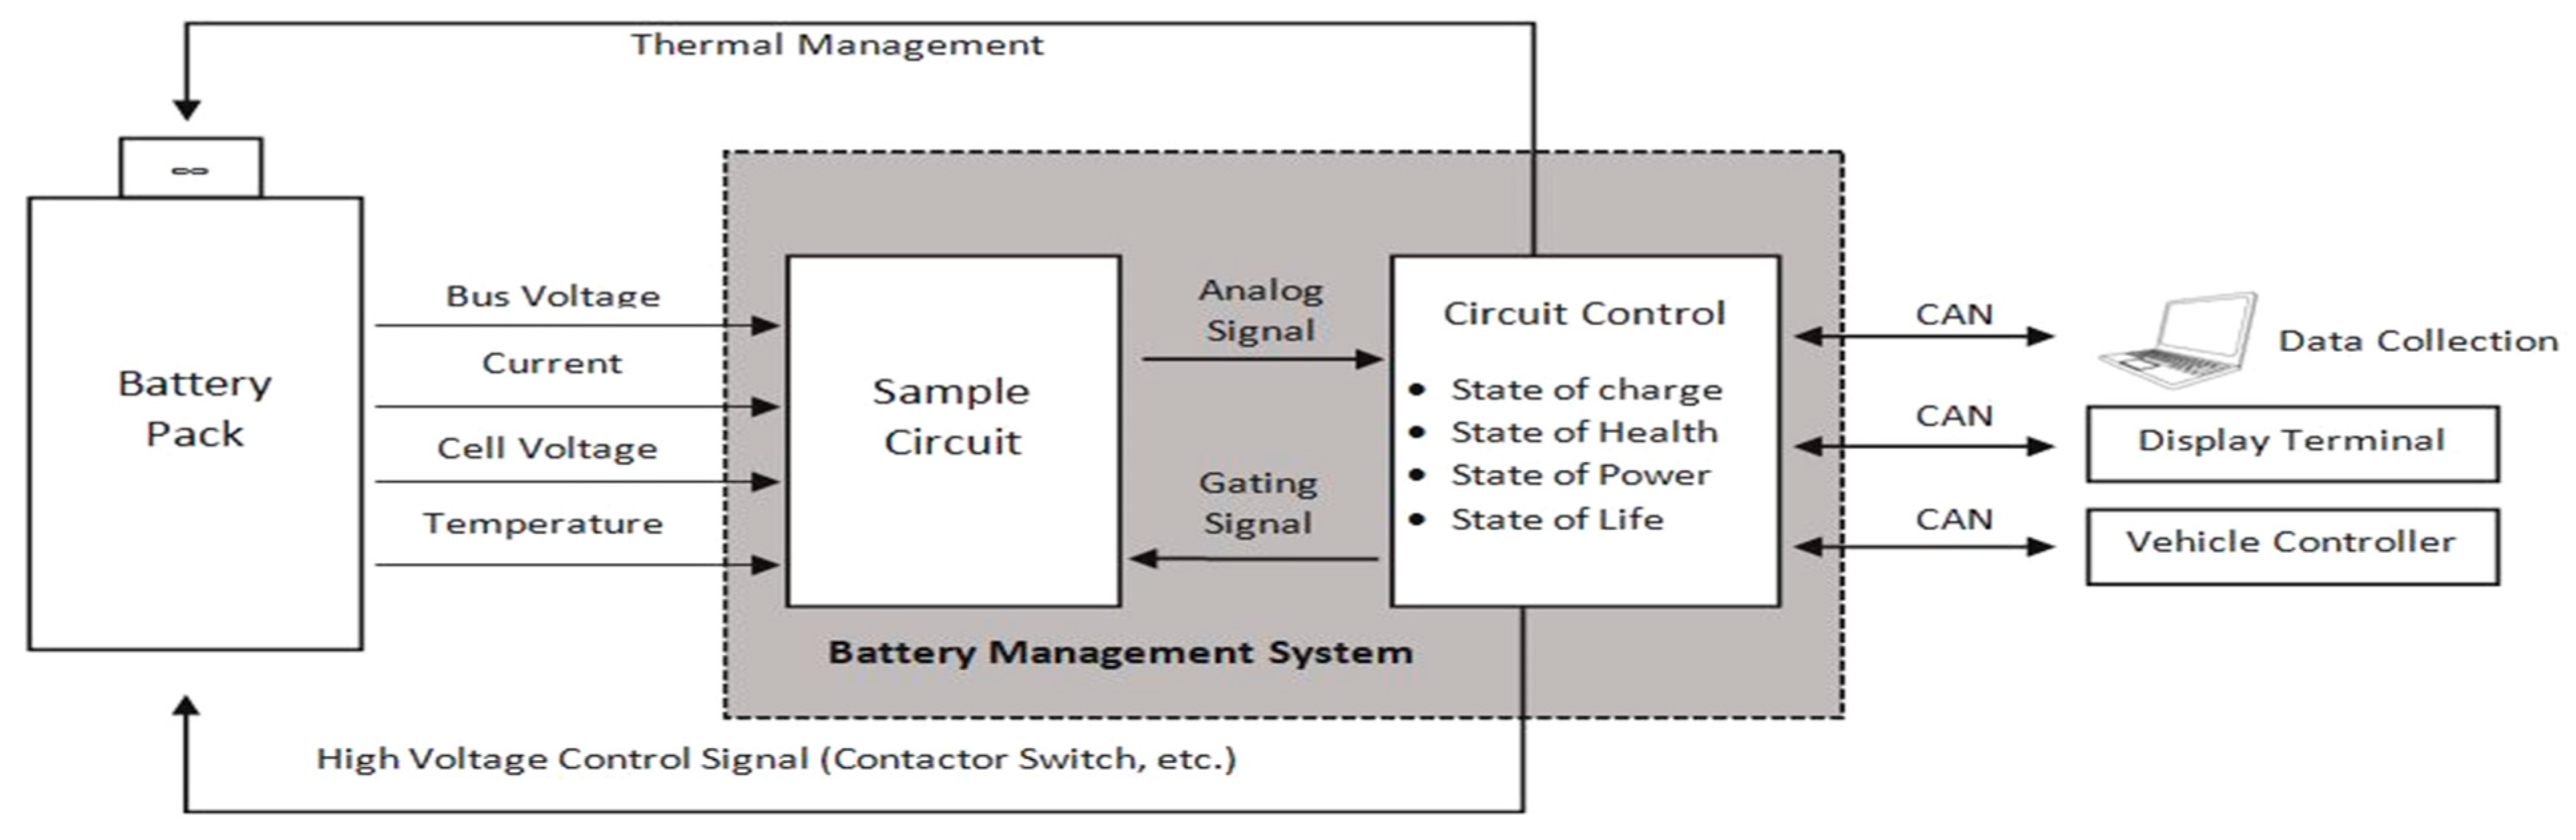 WEVJ Free FullText Characteristics of Battery Management Systems